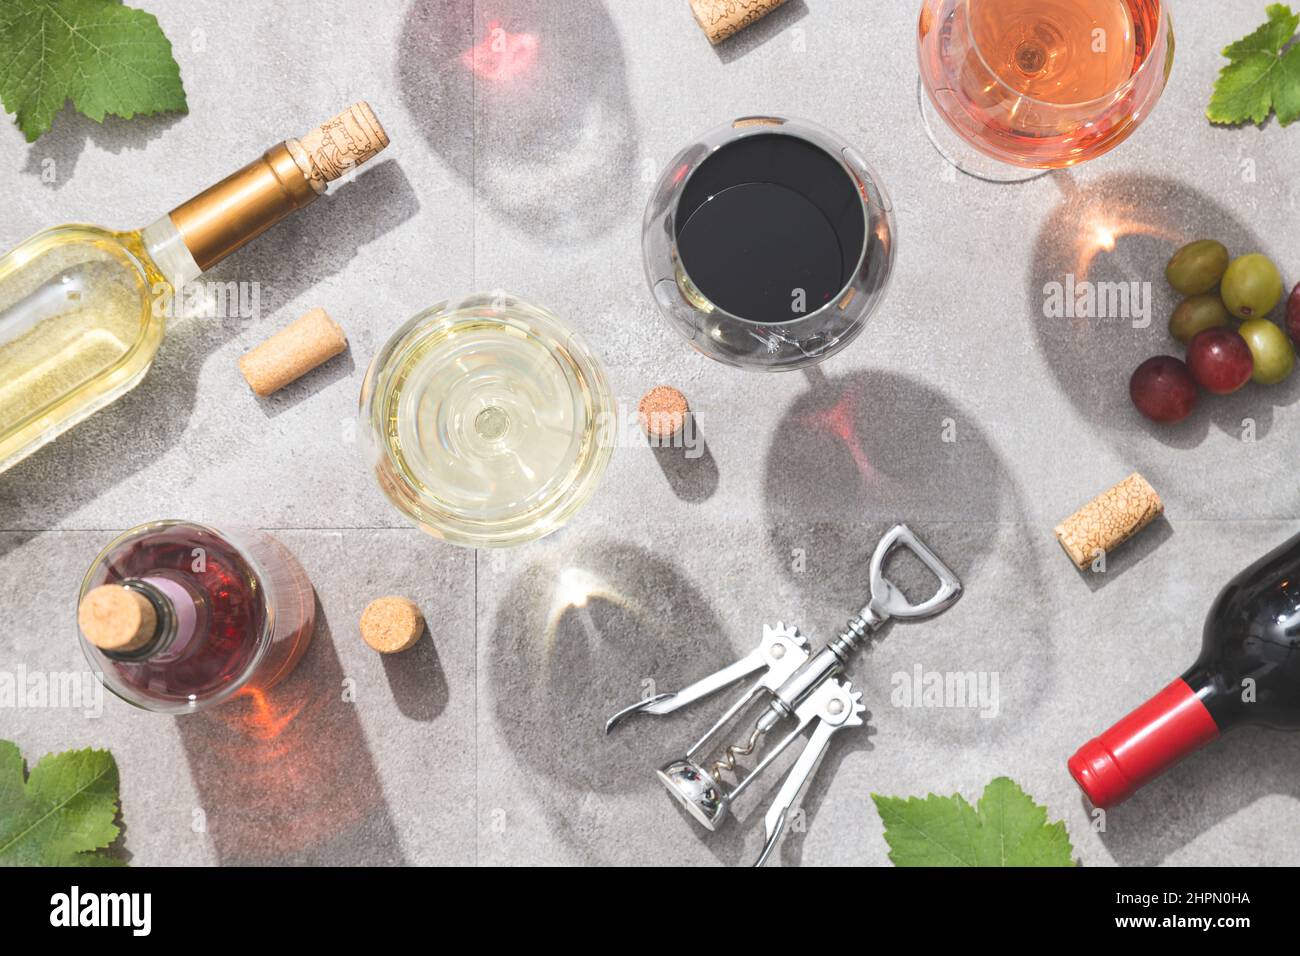 https://c8.alamy.com/comp/2HPN0HA/red-white-and-rose-wine-in-wine-glasses-on-concrete-background-top-view-beverage-and-wine-concept-2HPN0HA.jpg